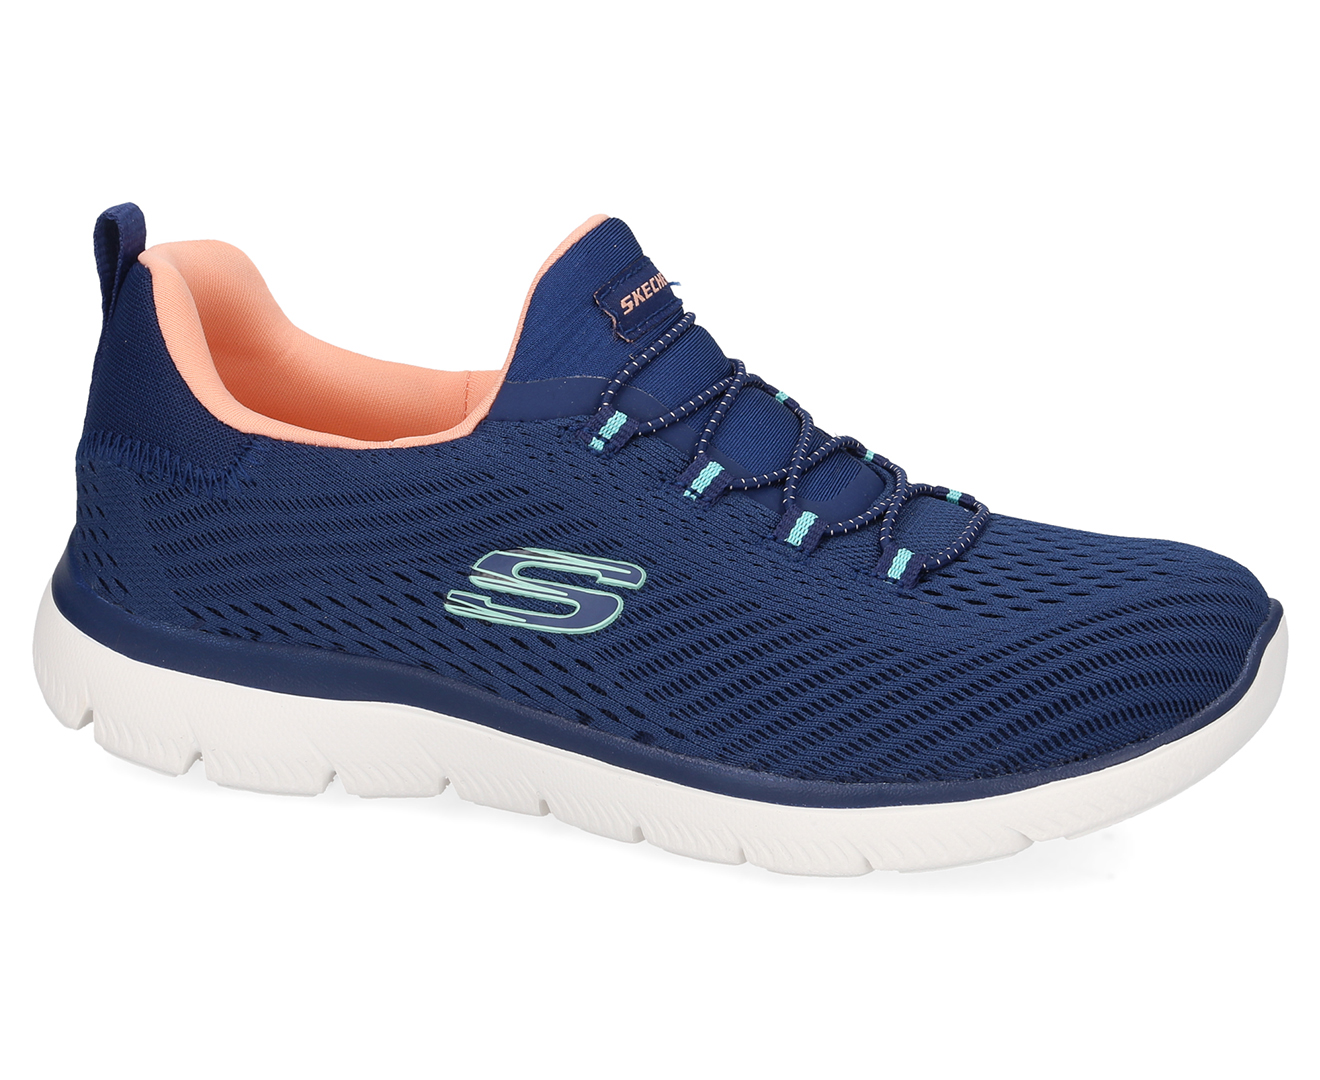 Skechers Women's Summits Fast Attraction Sneakers - Navy/Coral | Catch ...